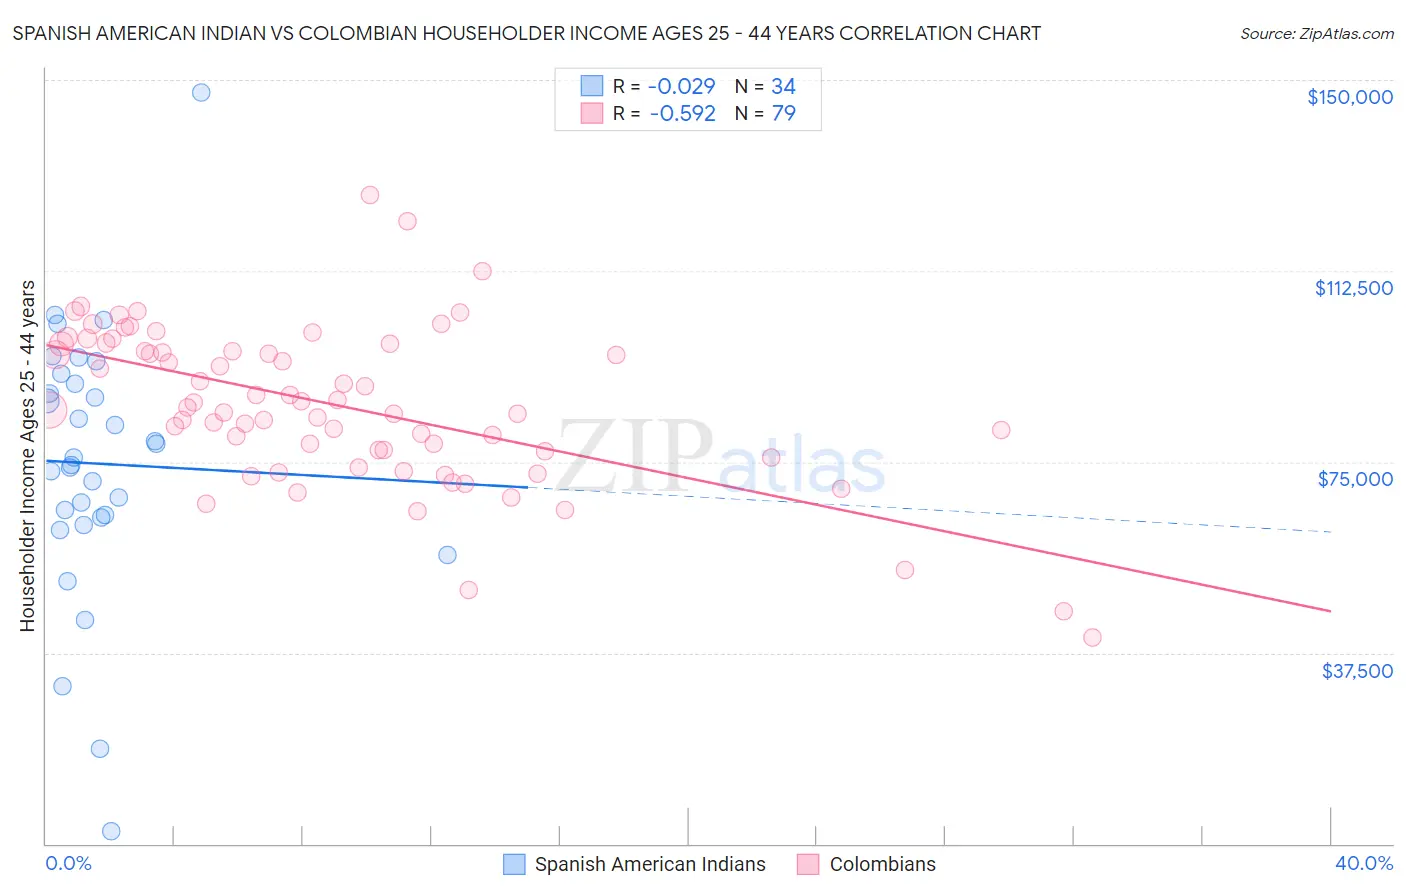 Spanish American Indian vs Colombian Householder Income Ages 25 - 44 years